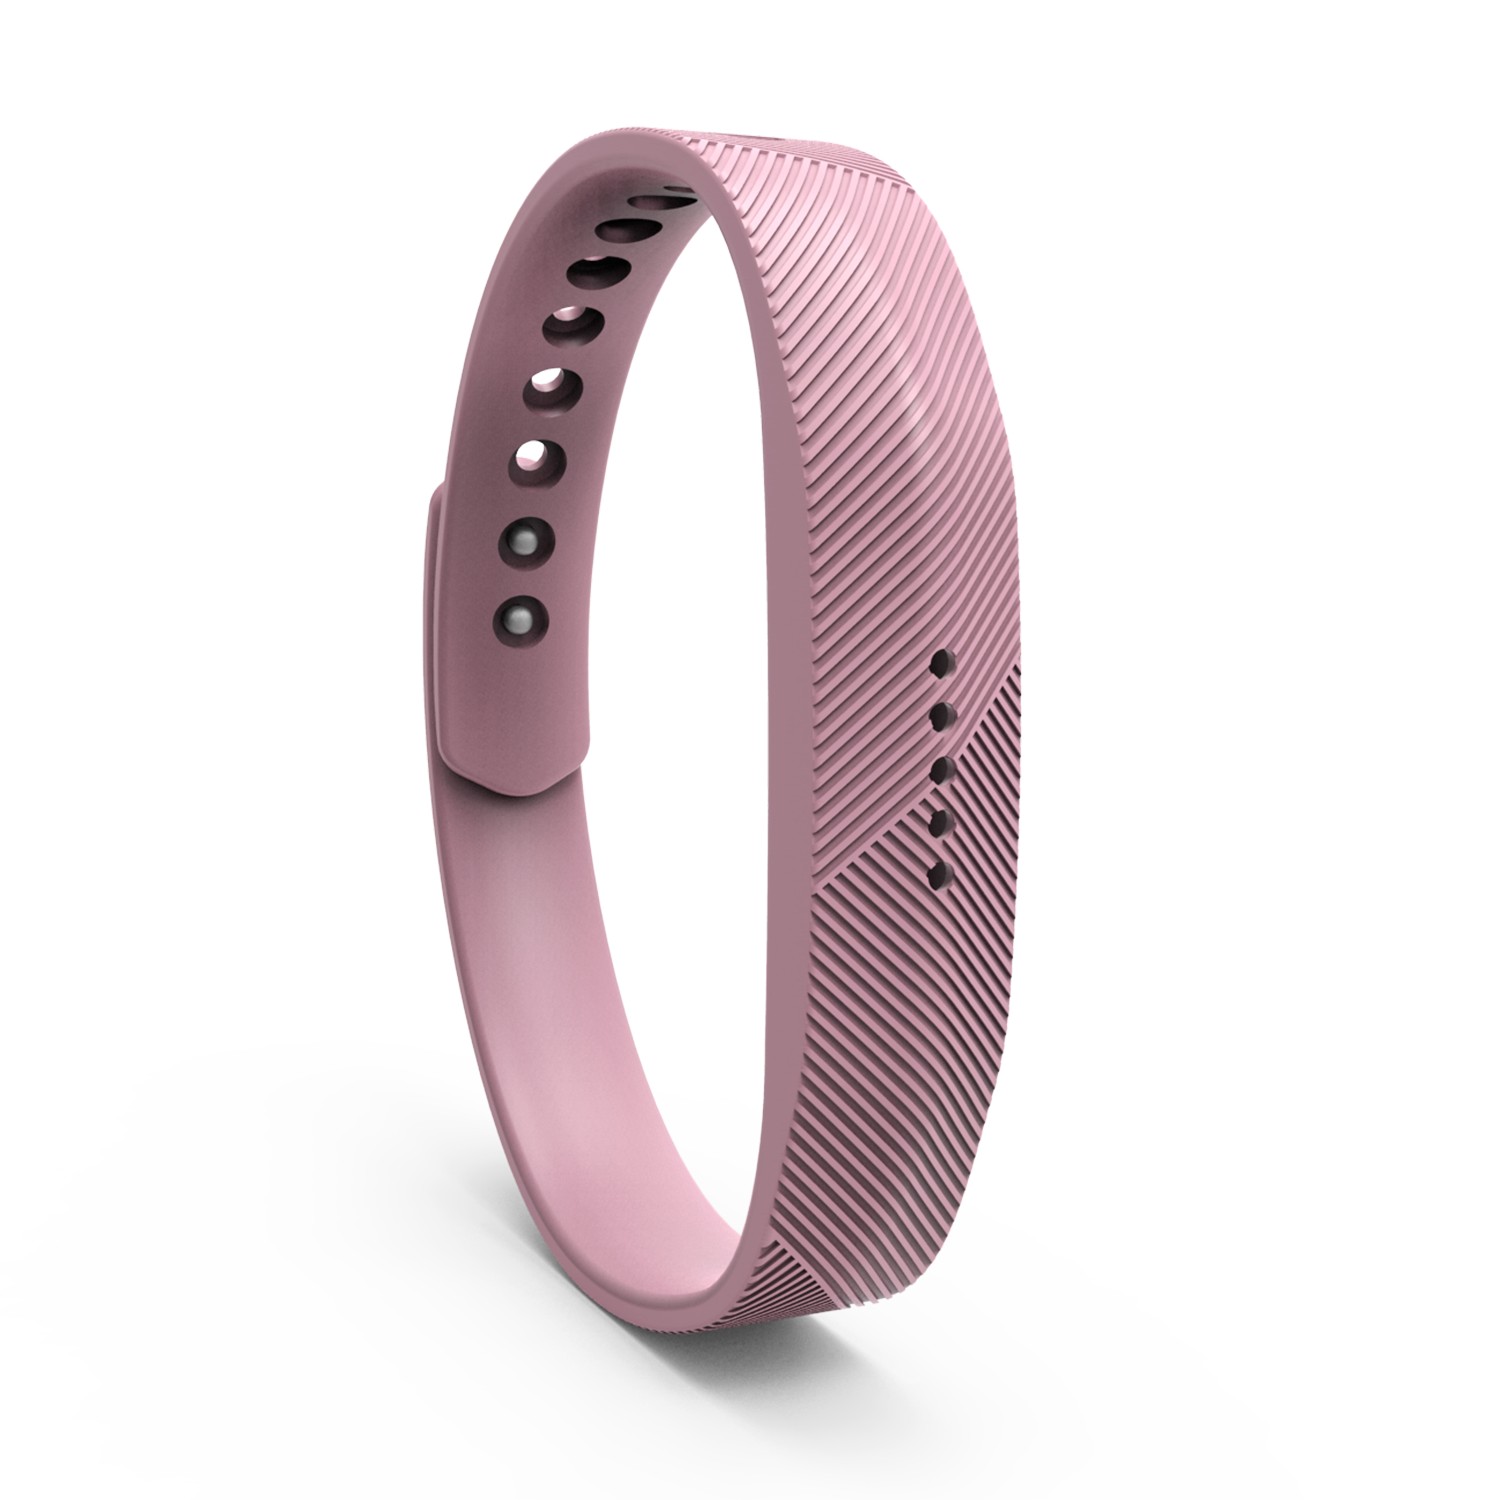 Bakeey-Multi-Color-Pure-Sports-T-Buckle-Soft-Silicone-Watch-Band-Strap-Replacement-for-Fitbit-Flex2-1747383-20